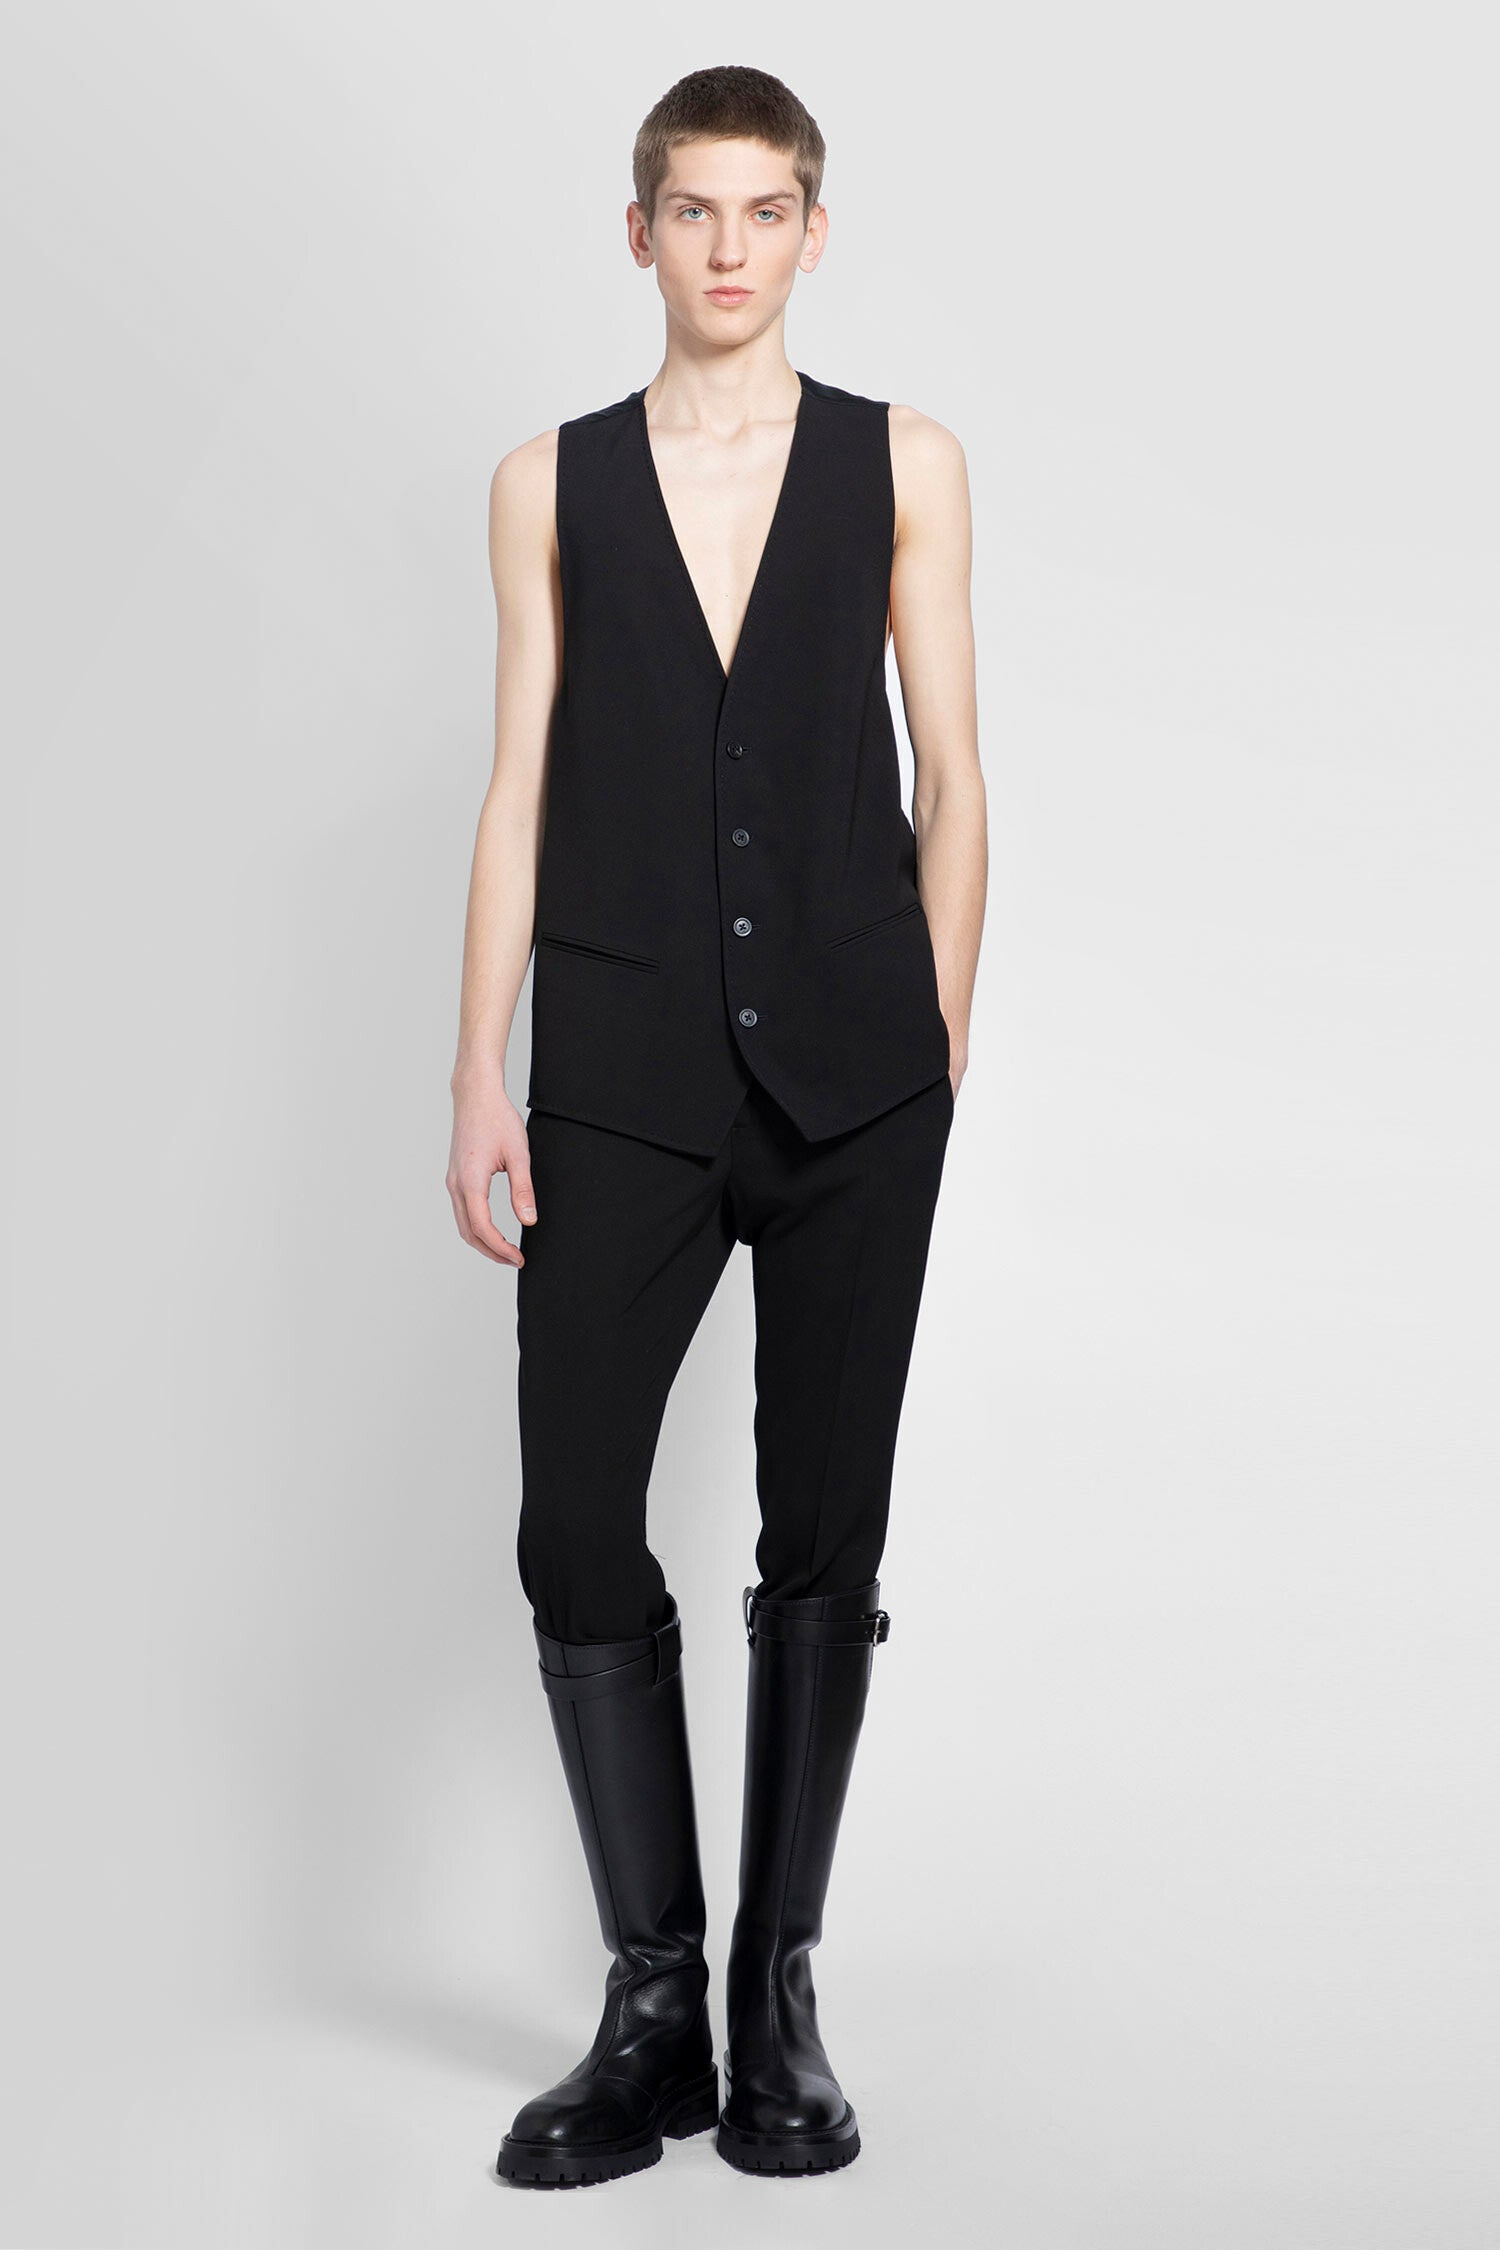 Women's Tuxedo Jacket - Marlowe By After Six In Black | The Dessy Group